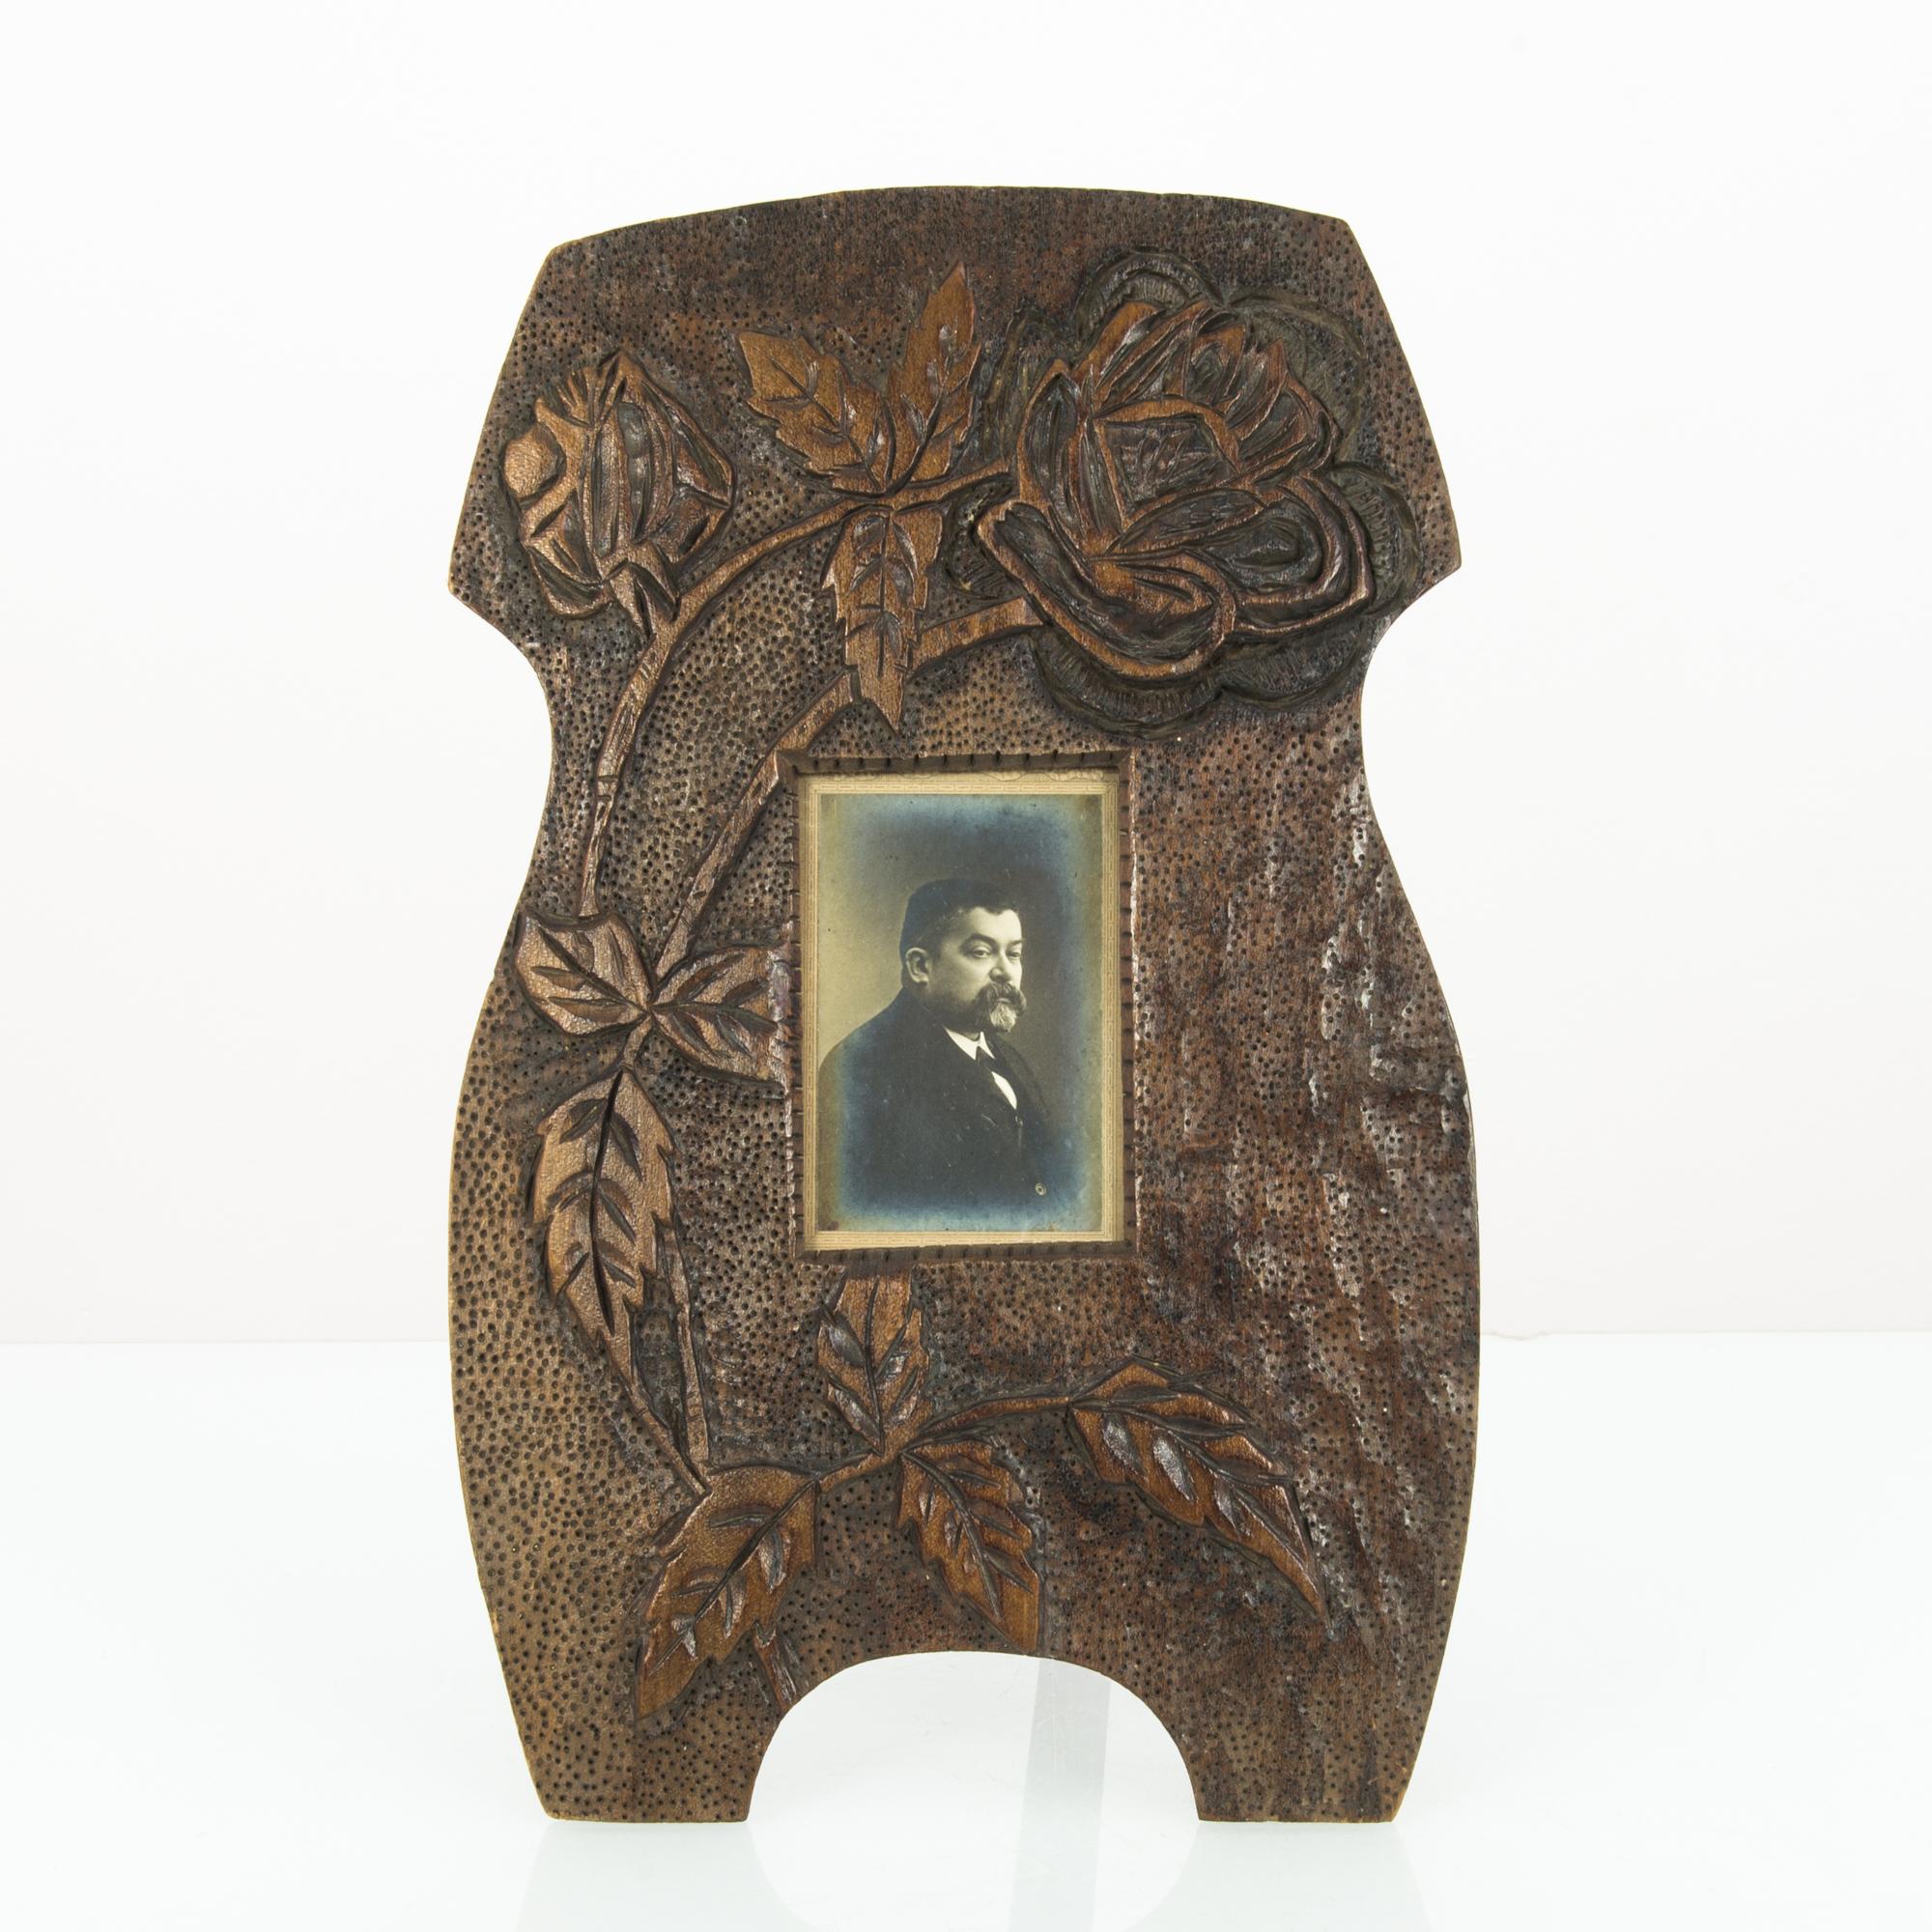 A photographic portrait in a carved wooden frame from Belgium, circa 1920. The frame is ample, while the print is small: the photograph is positioned under the sweep of a carved rose in full bloom. The edges of the frame curve in a sinuous,